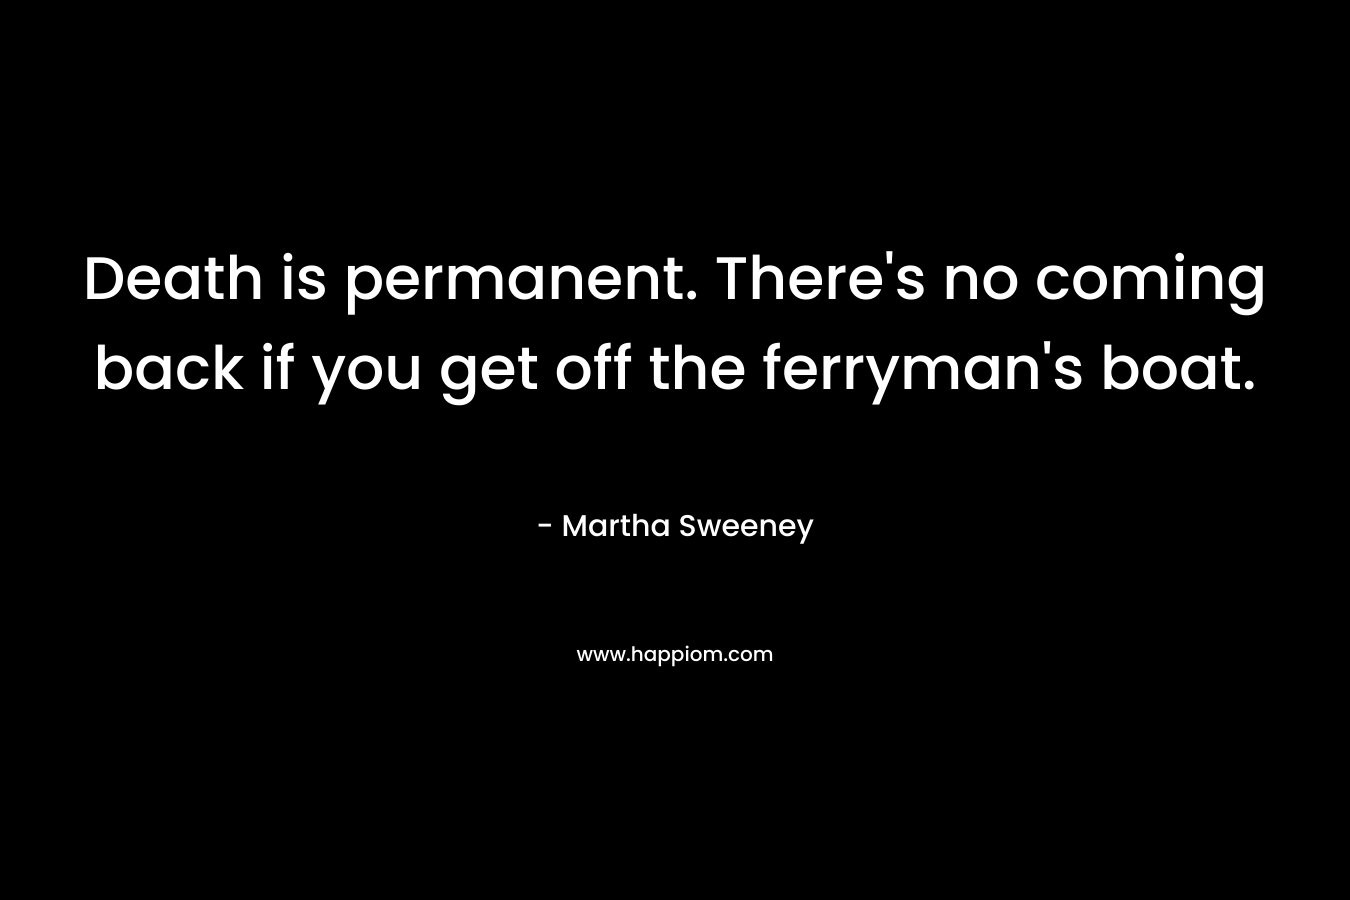 Death is permanent. There’s no coming back if you get off the ferryman’s boat. – Martha Sweeney